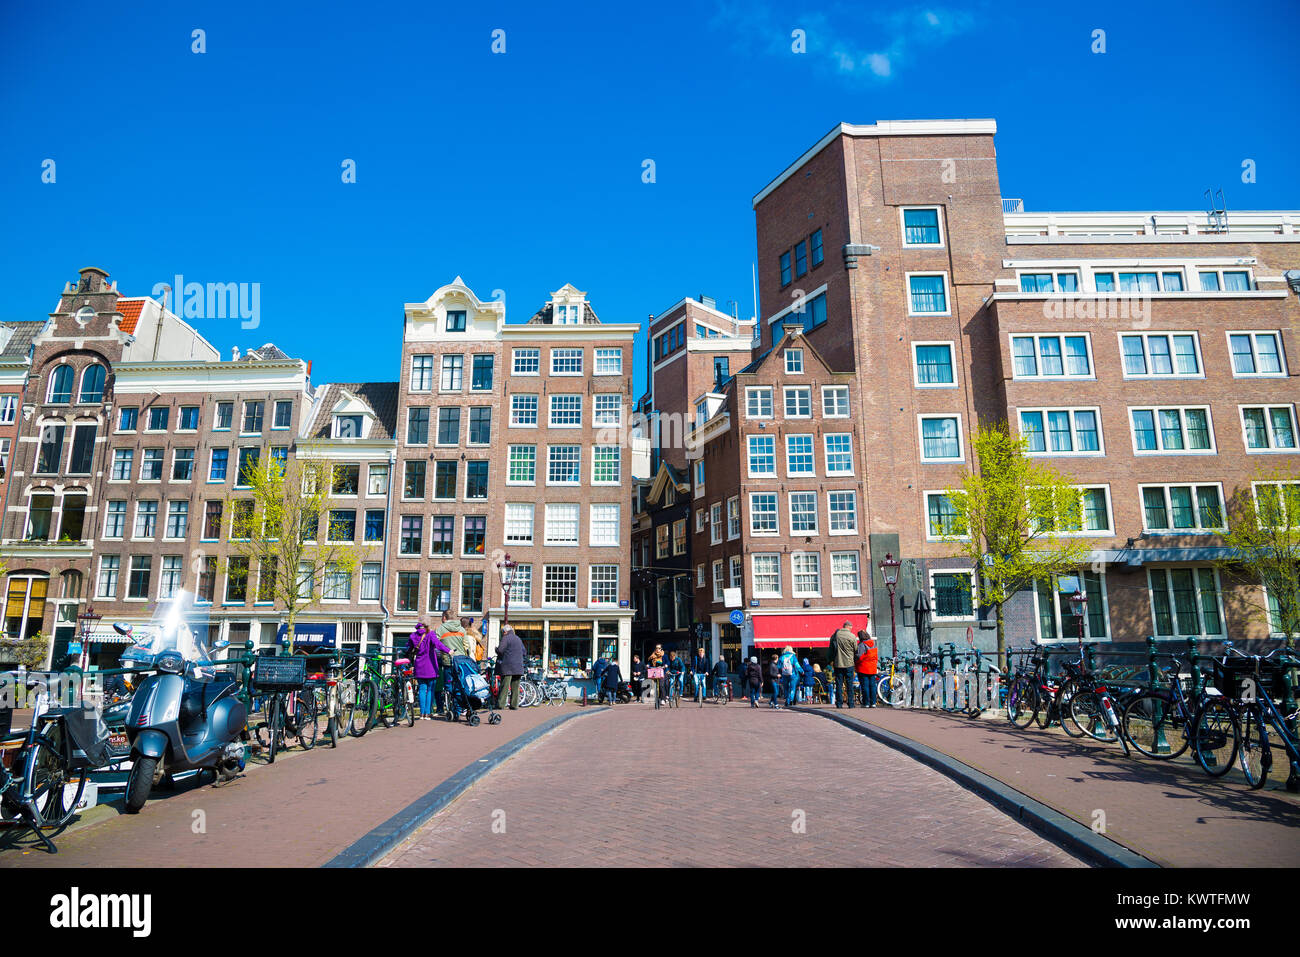 Amsterdam, Netherlands - April 19, 2017: Historical bridge Armbrug over canal in Amsterdam, Holland Stock Photo